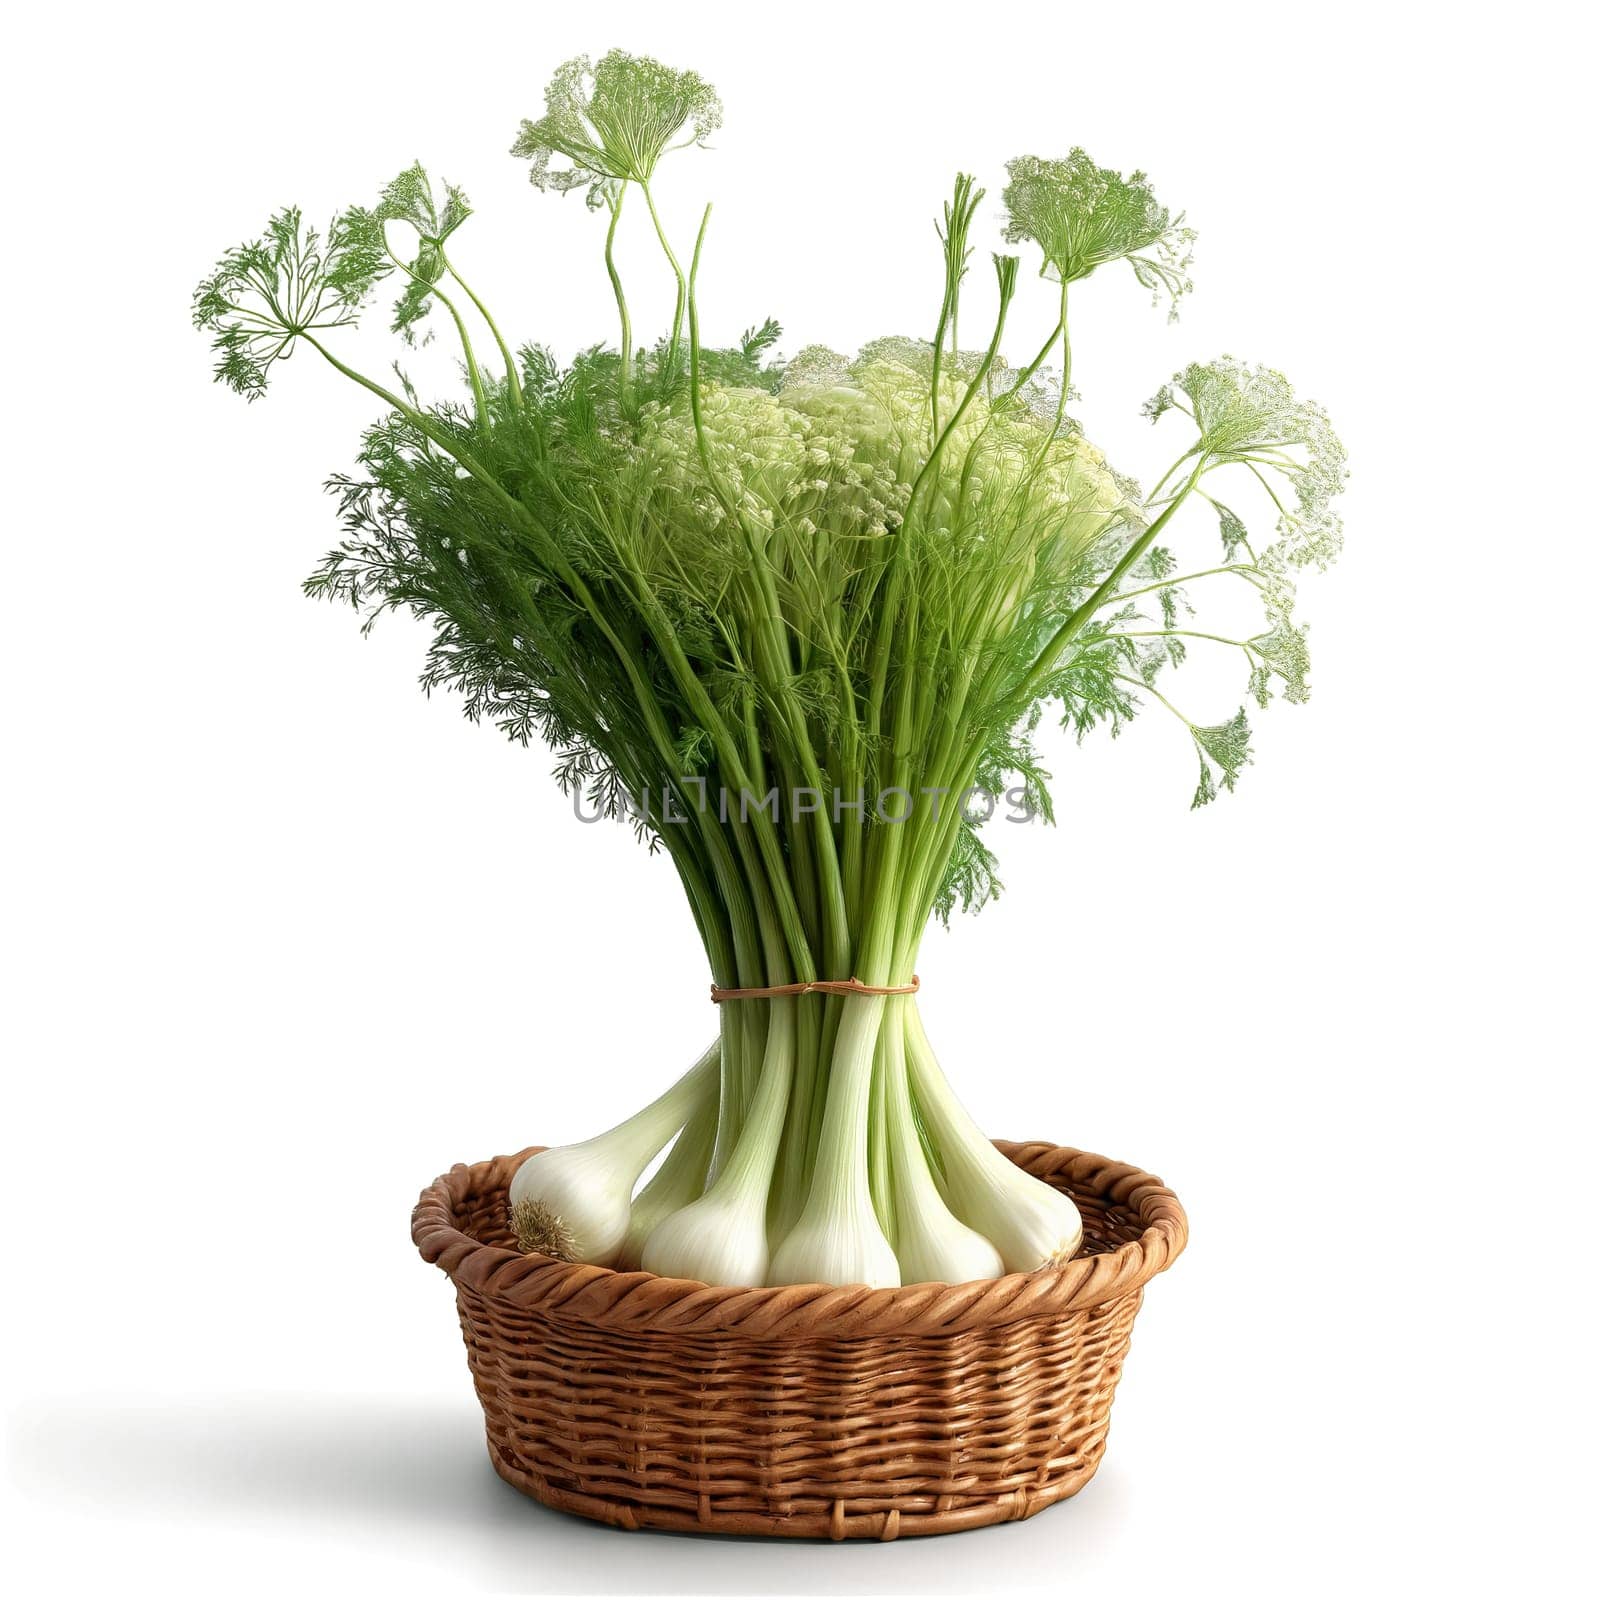 Fennel foeniculum vulgare white and green whole and sliced dancing over vintage wicker basket misty by panophotograph